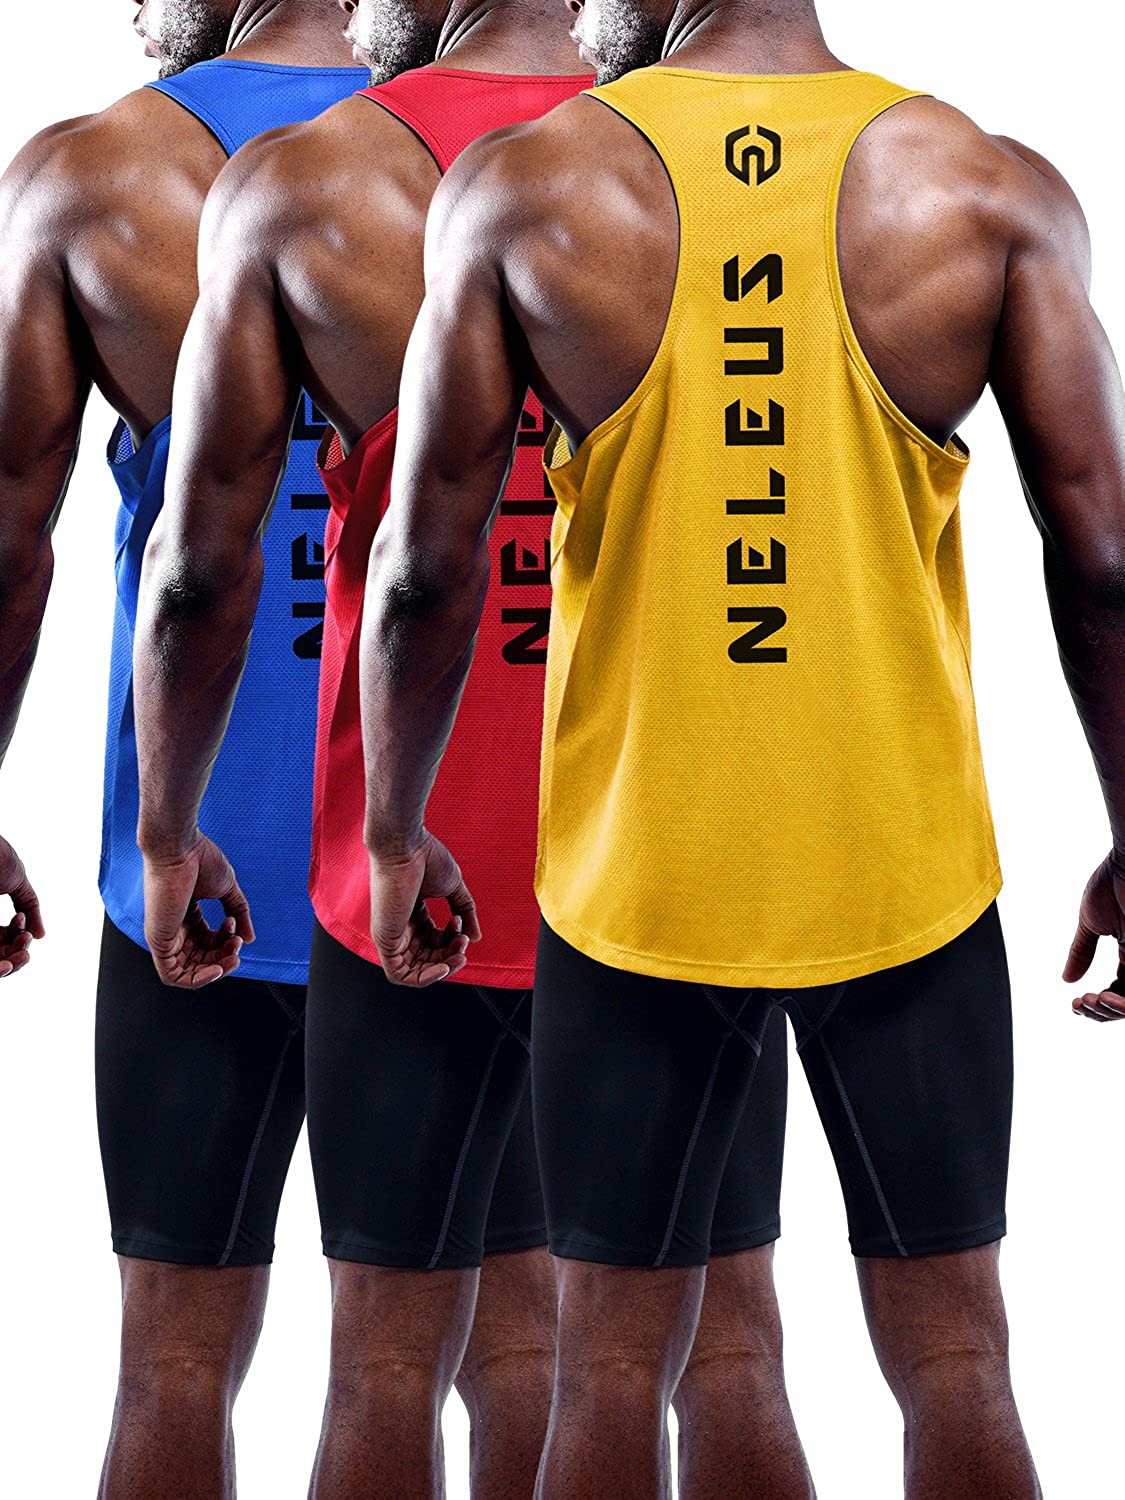 Neleus Dry Fit Workout Athletic Muscle Tank with Hoods Pack of 3 